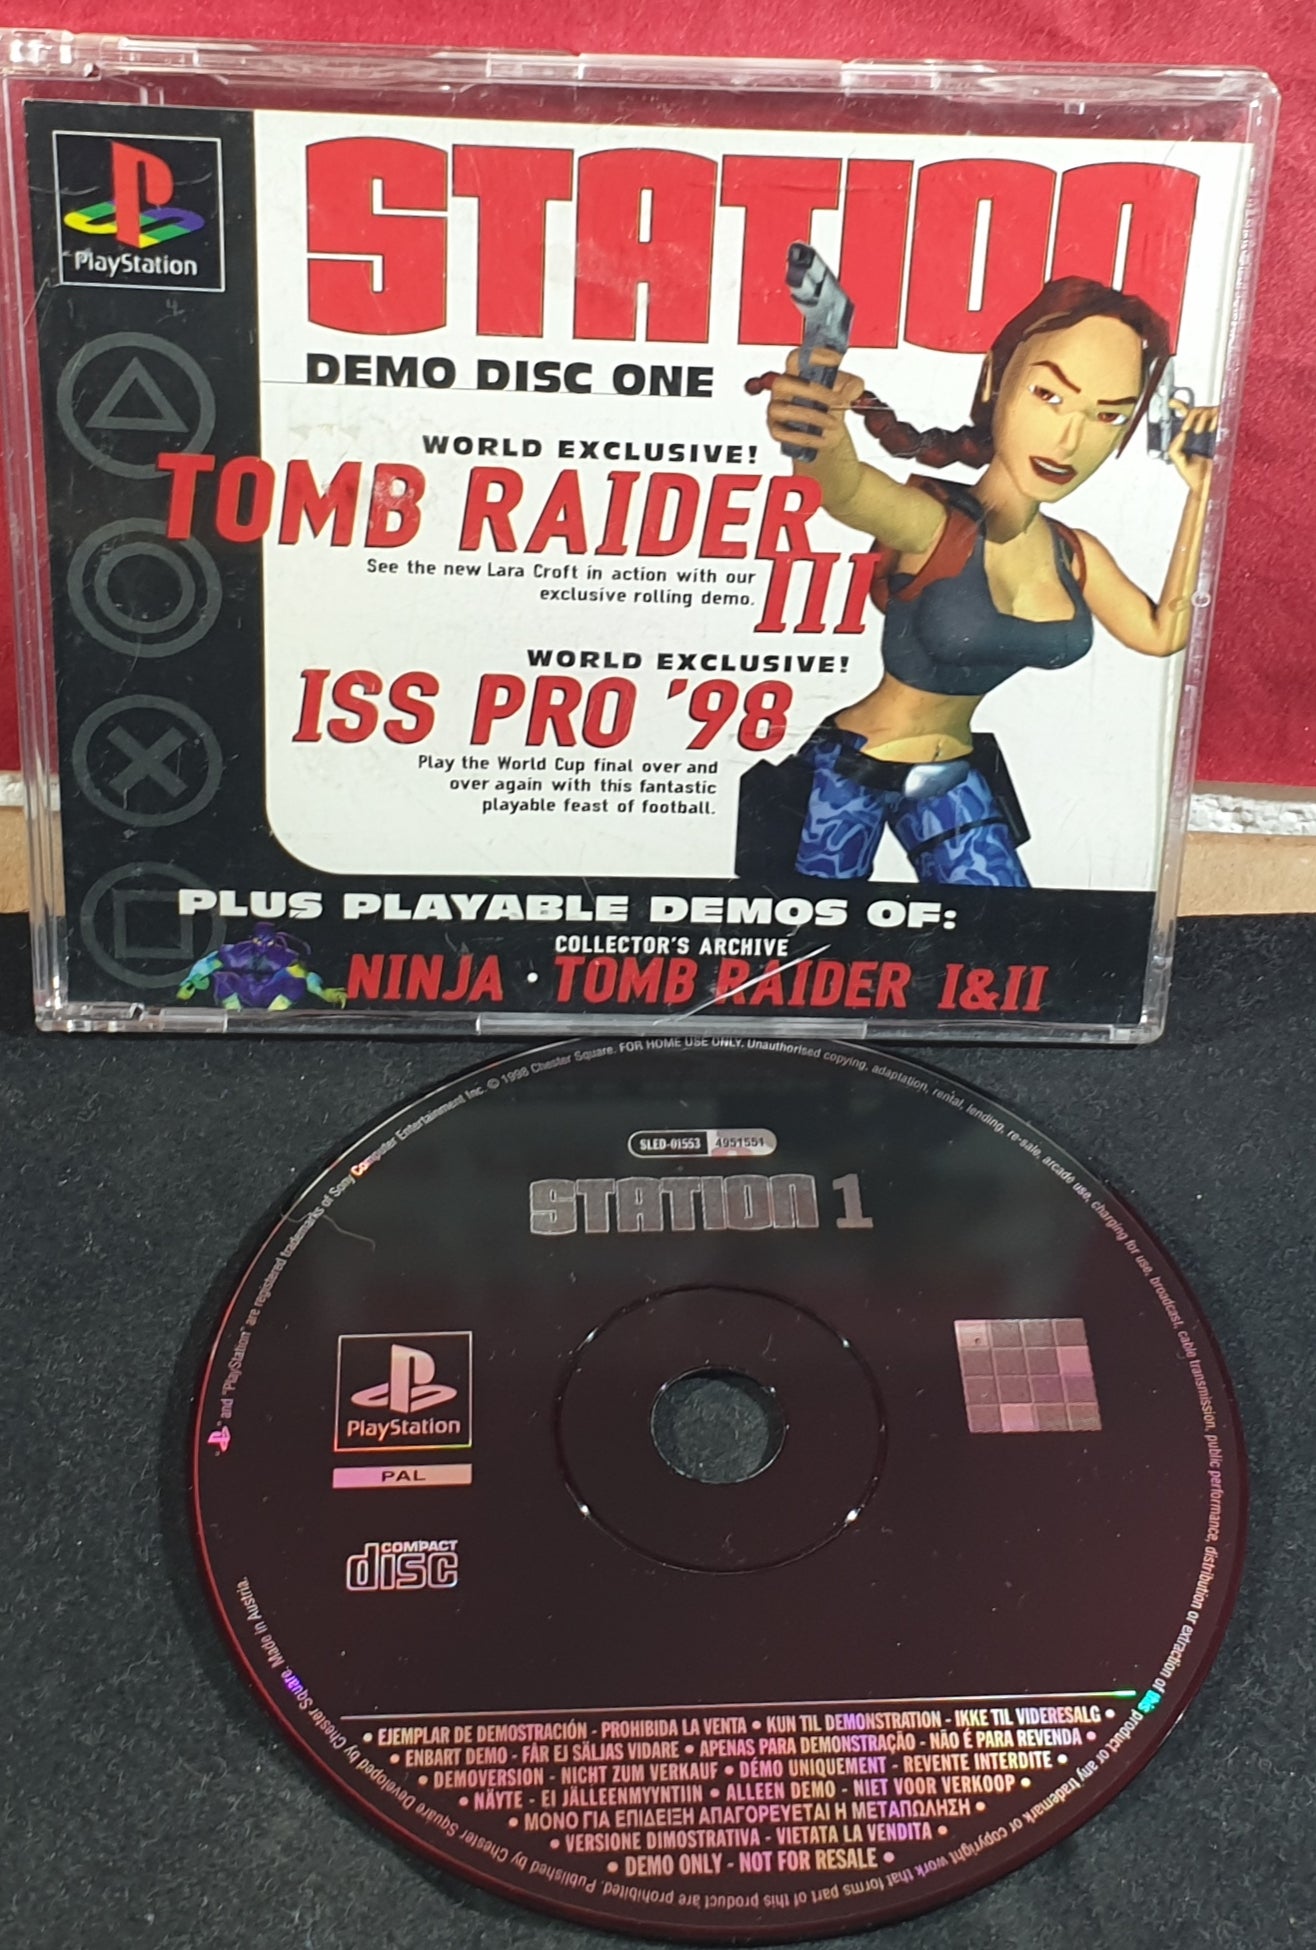 Station Sony Playstation 1 (PS1) Demo Disc 1